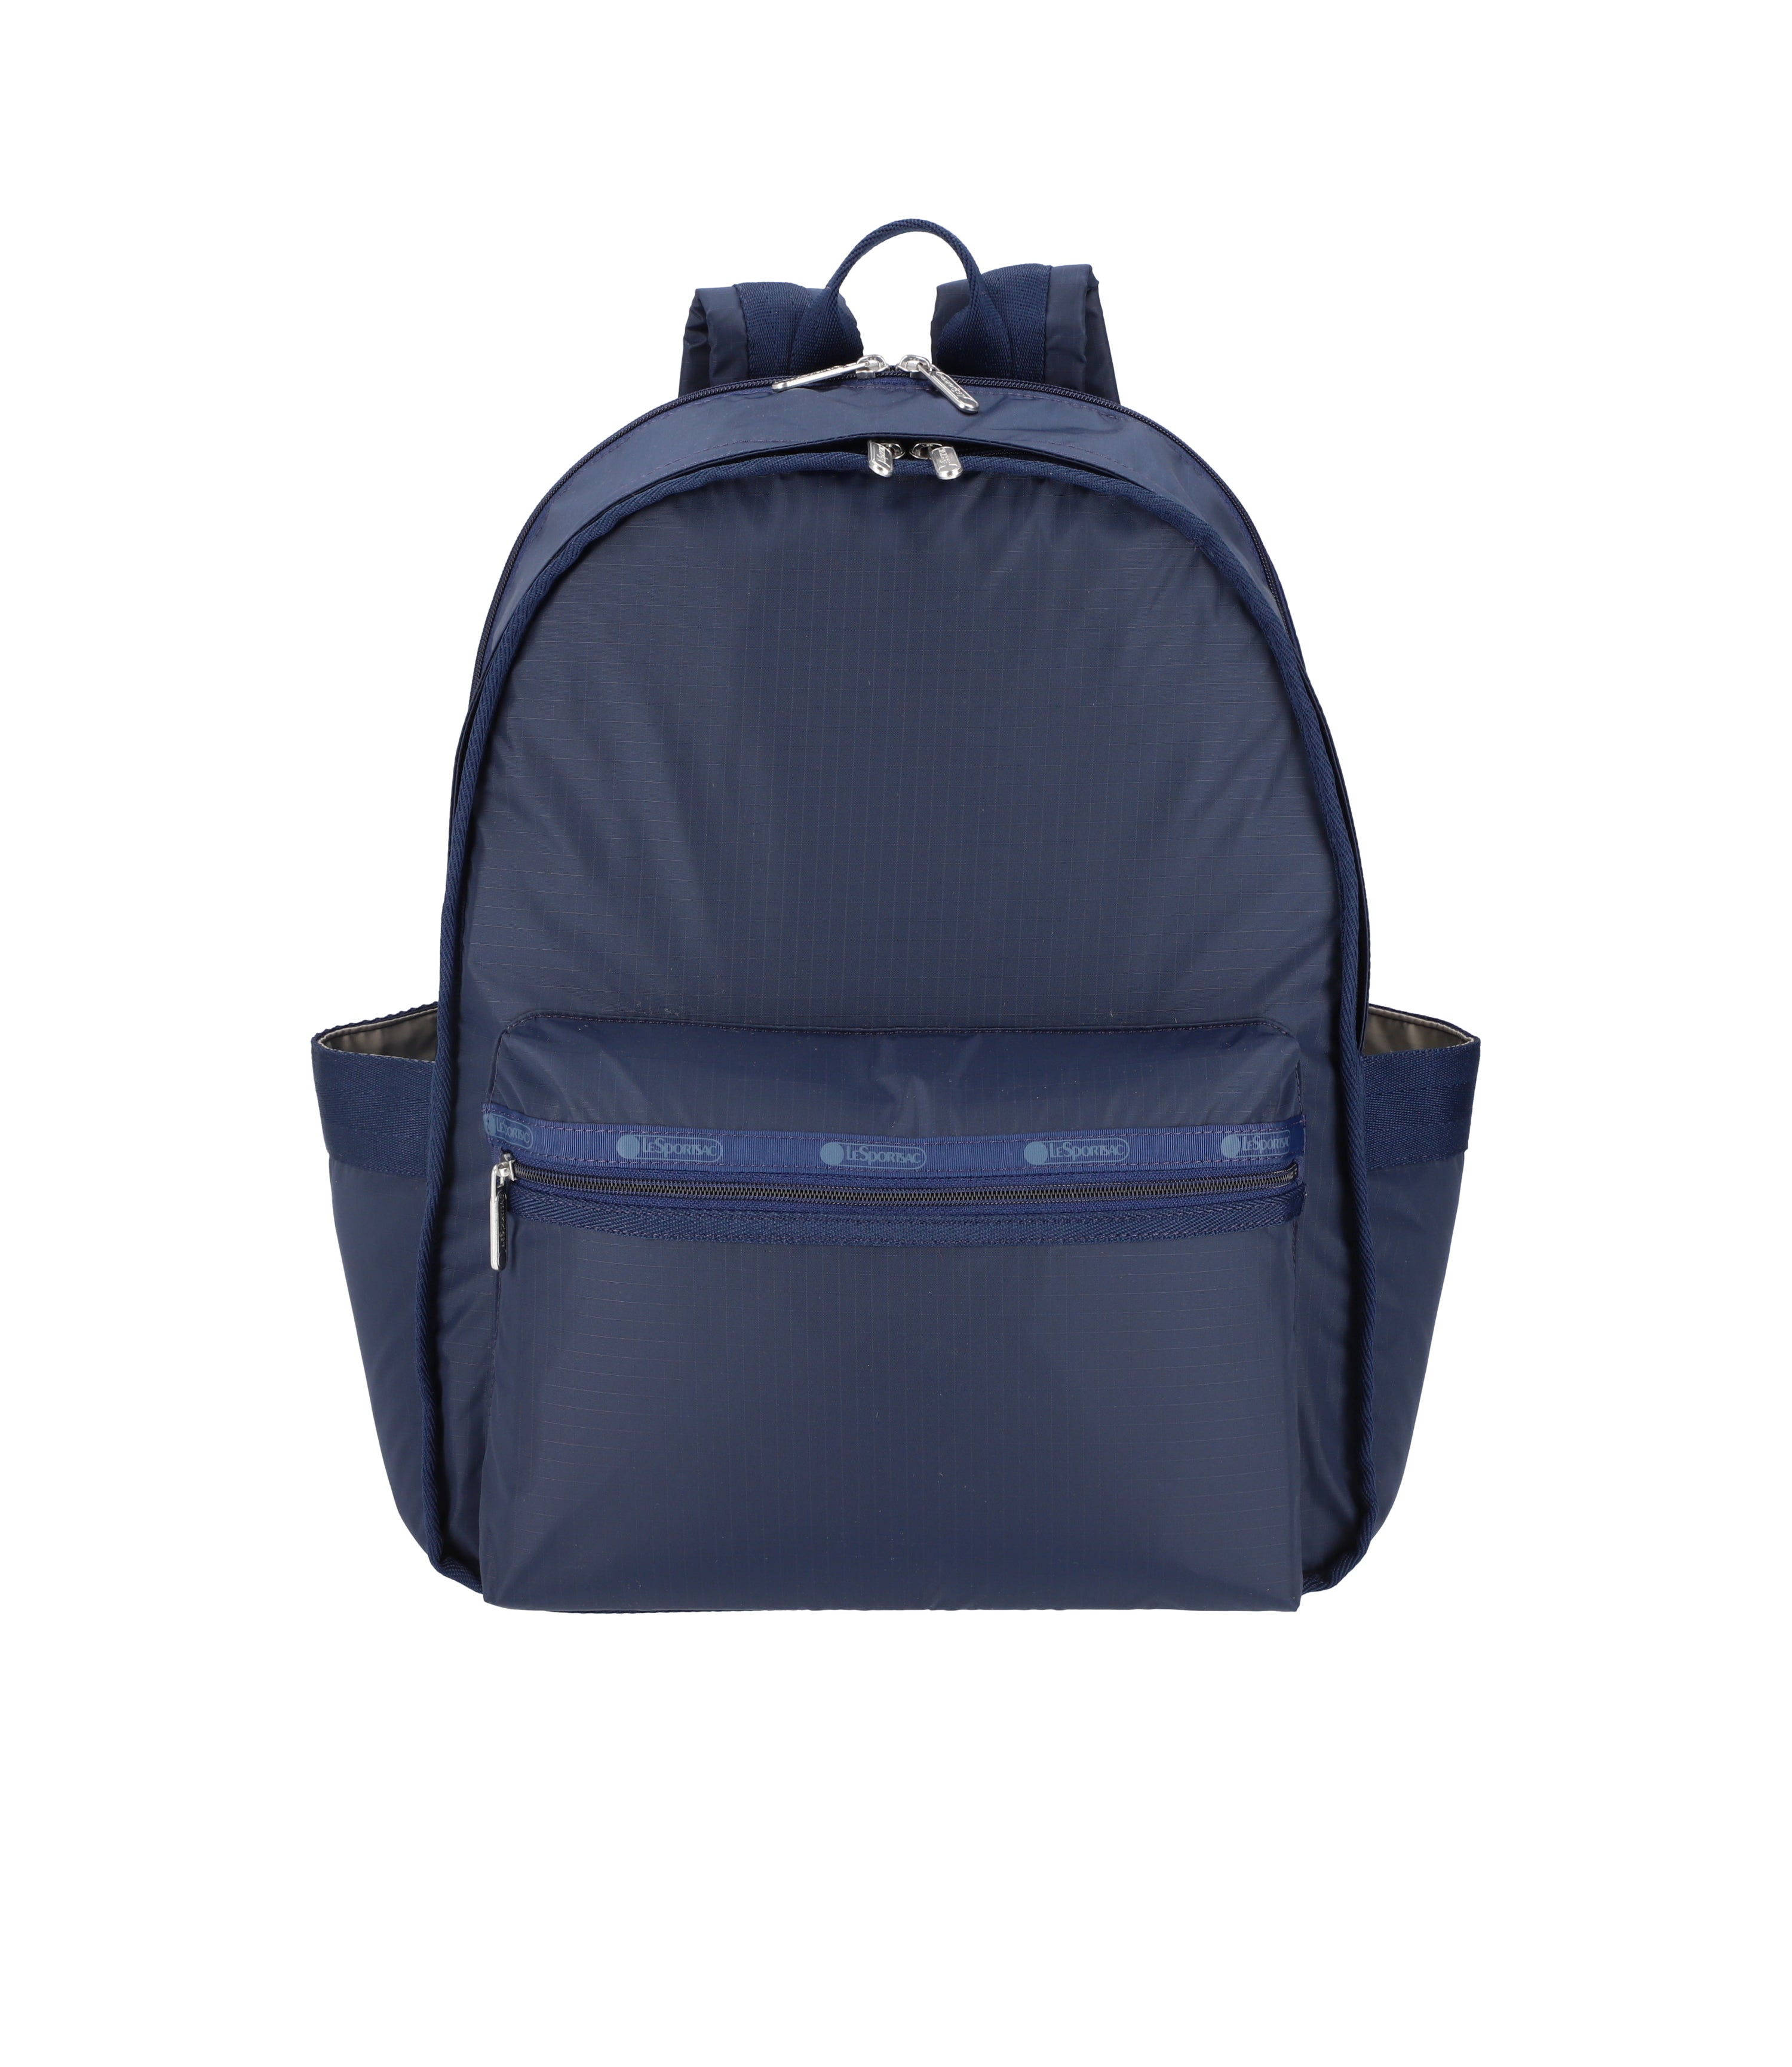 Route Backpack - Navy Blue solid – LeSportsac